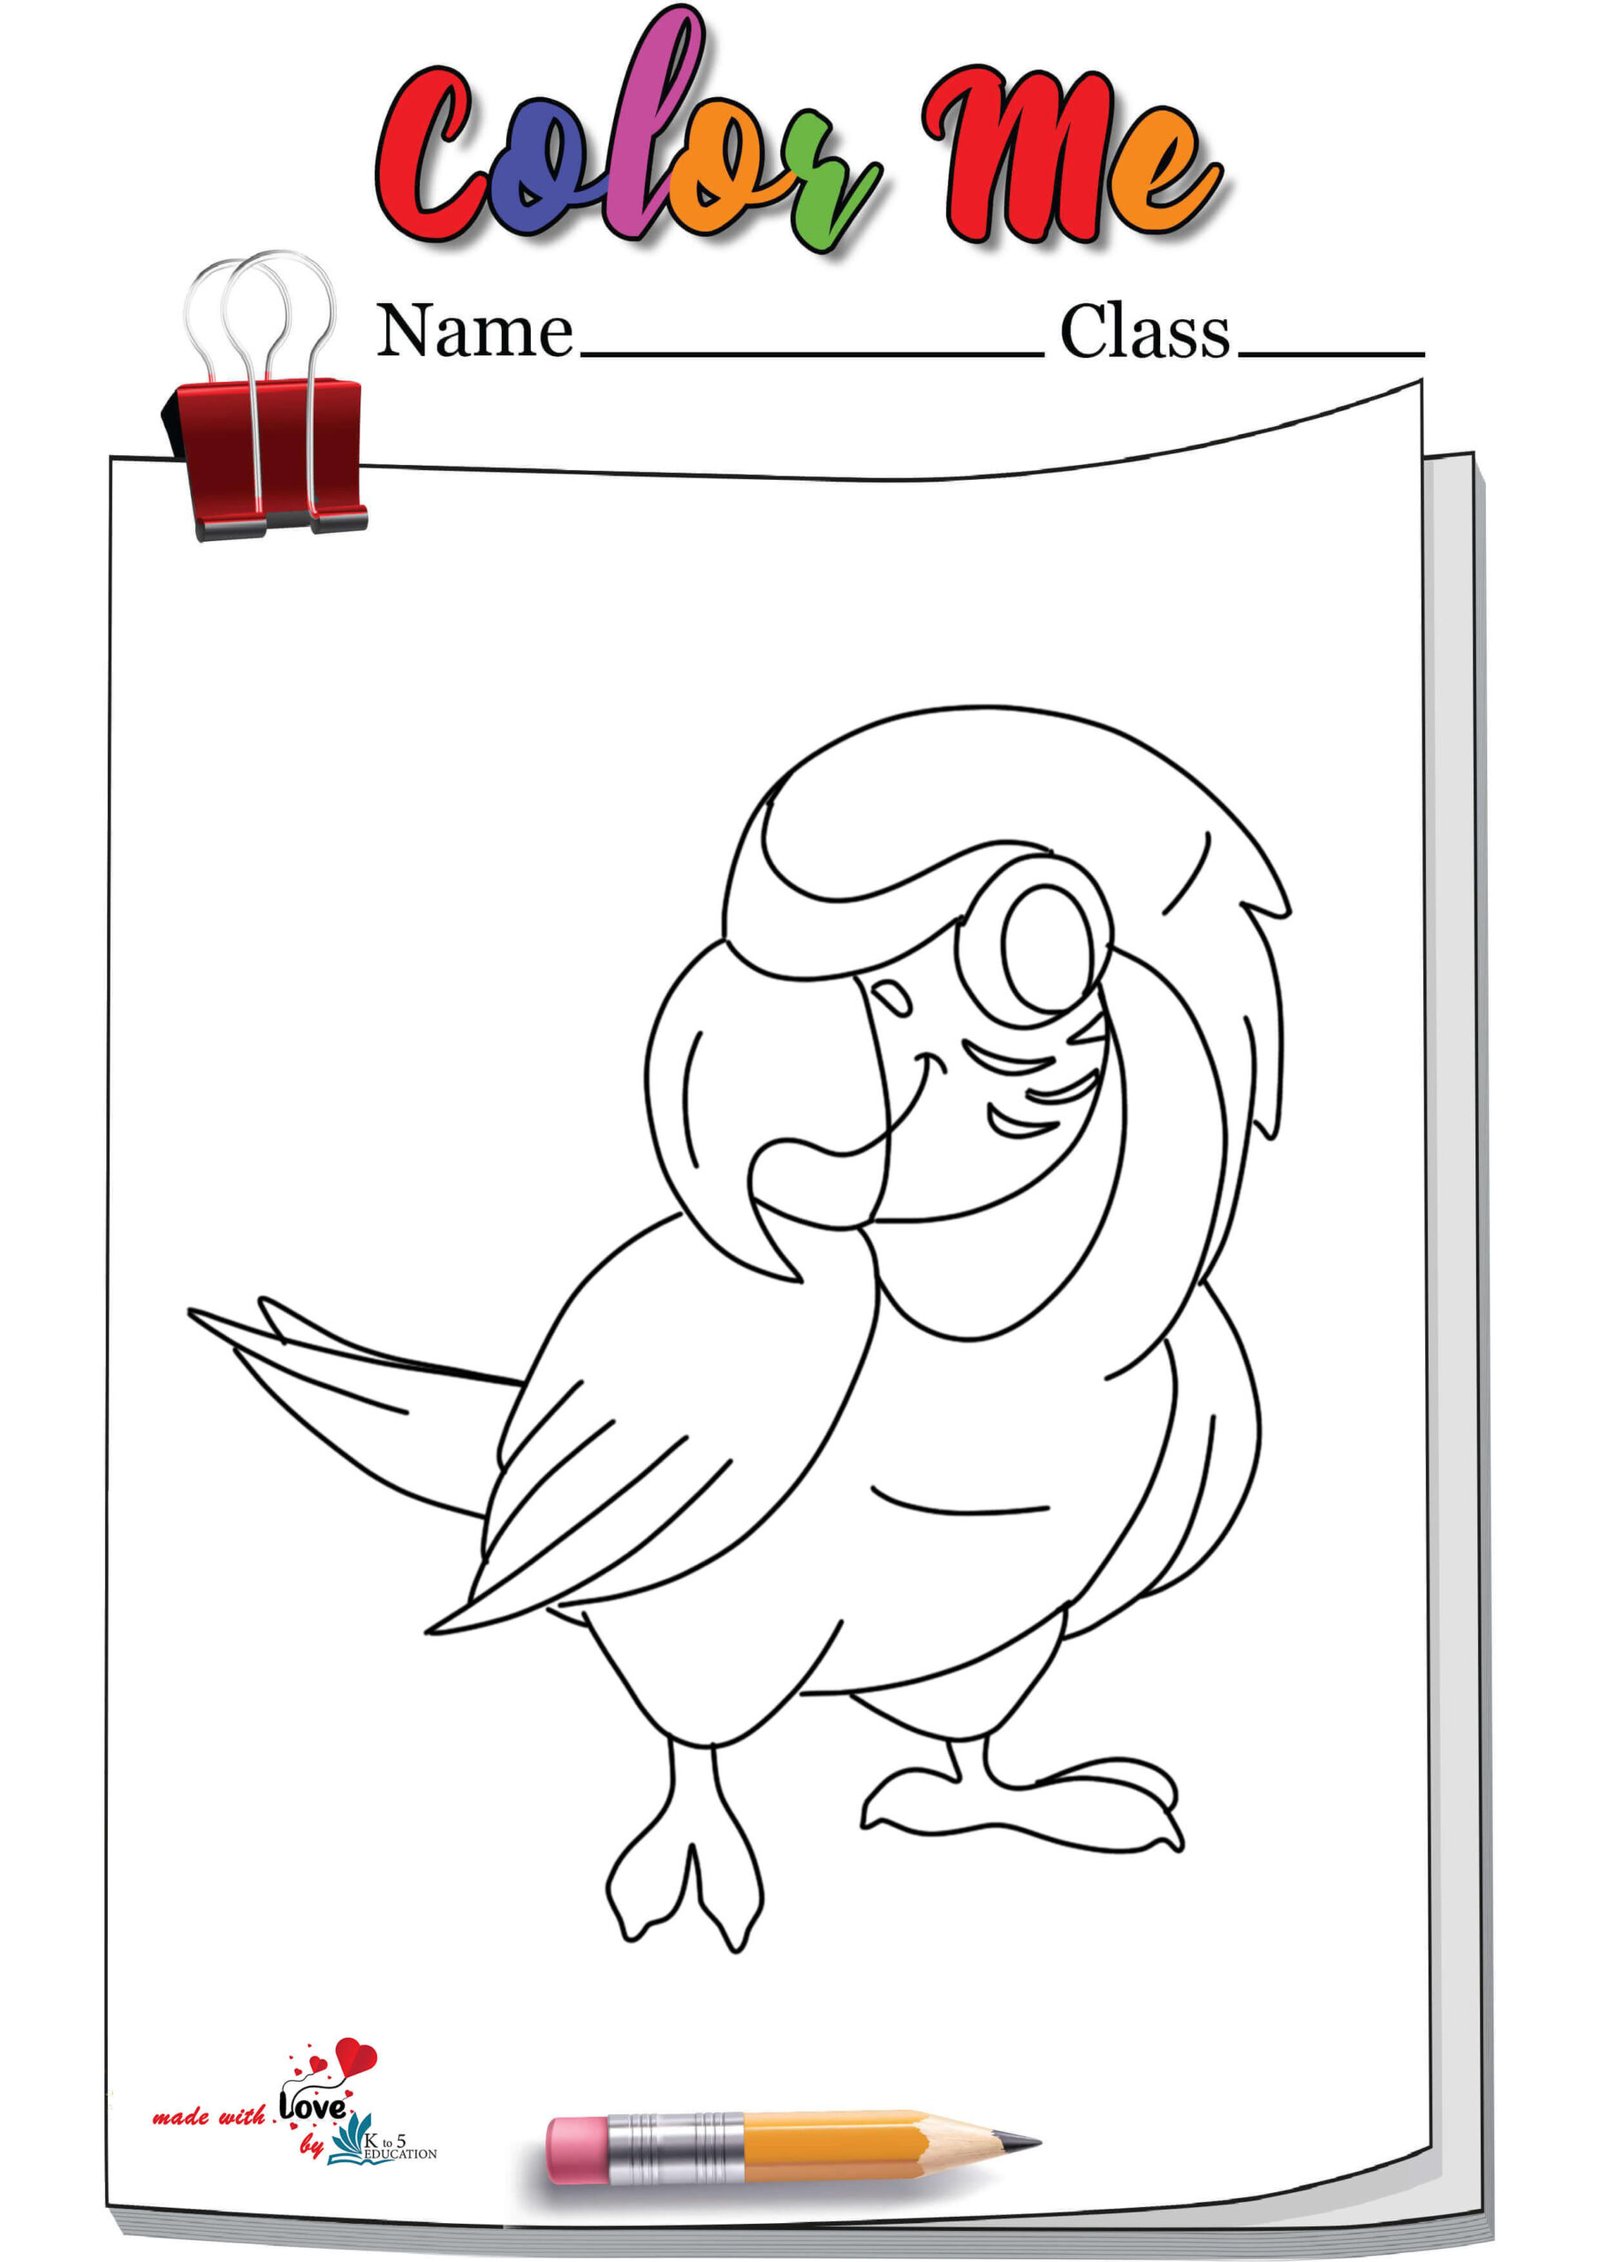 Free Parrot Coloring Page